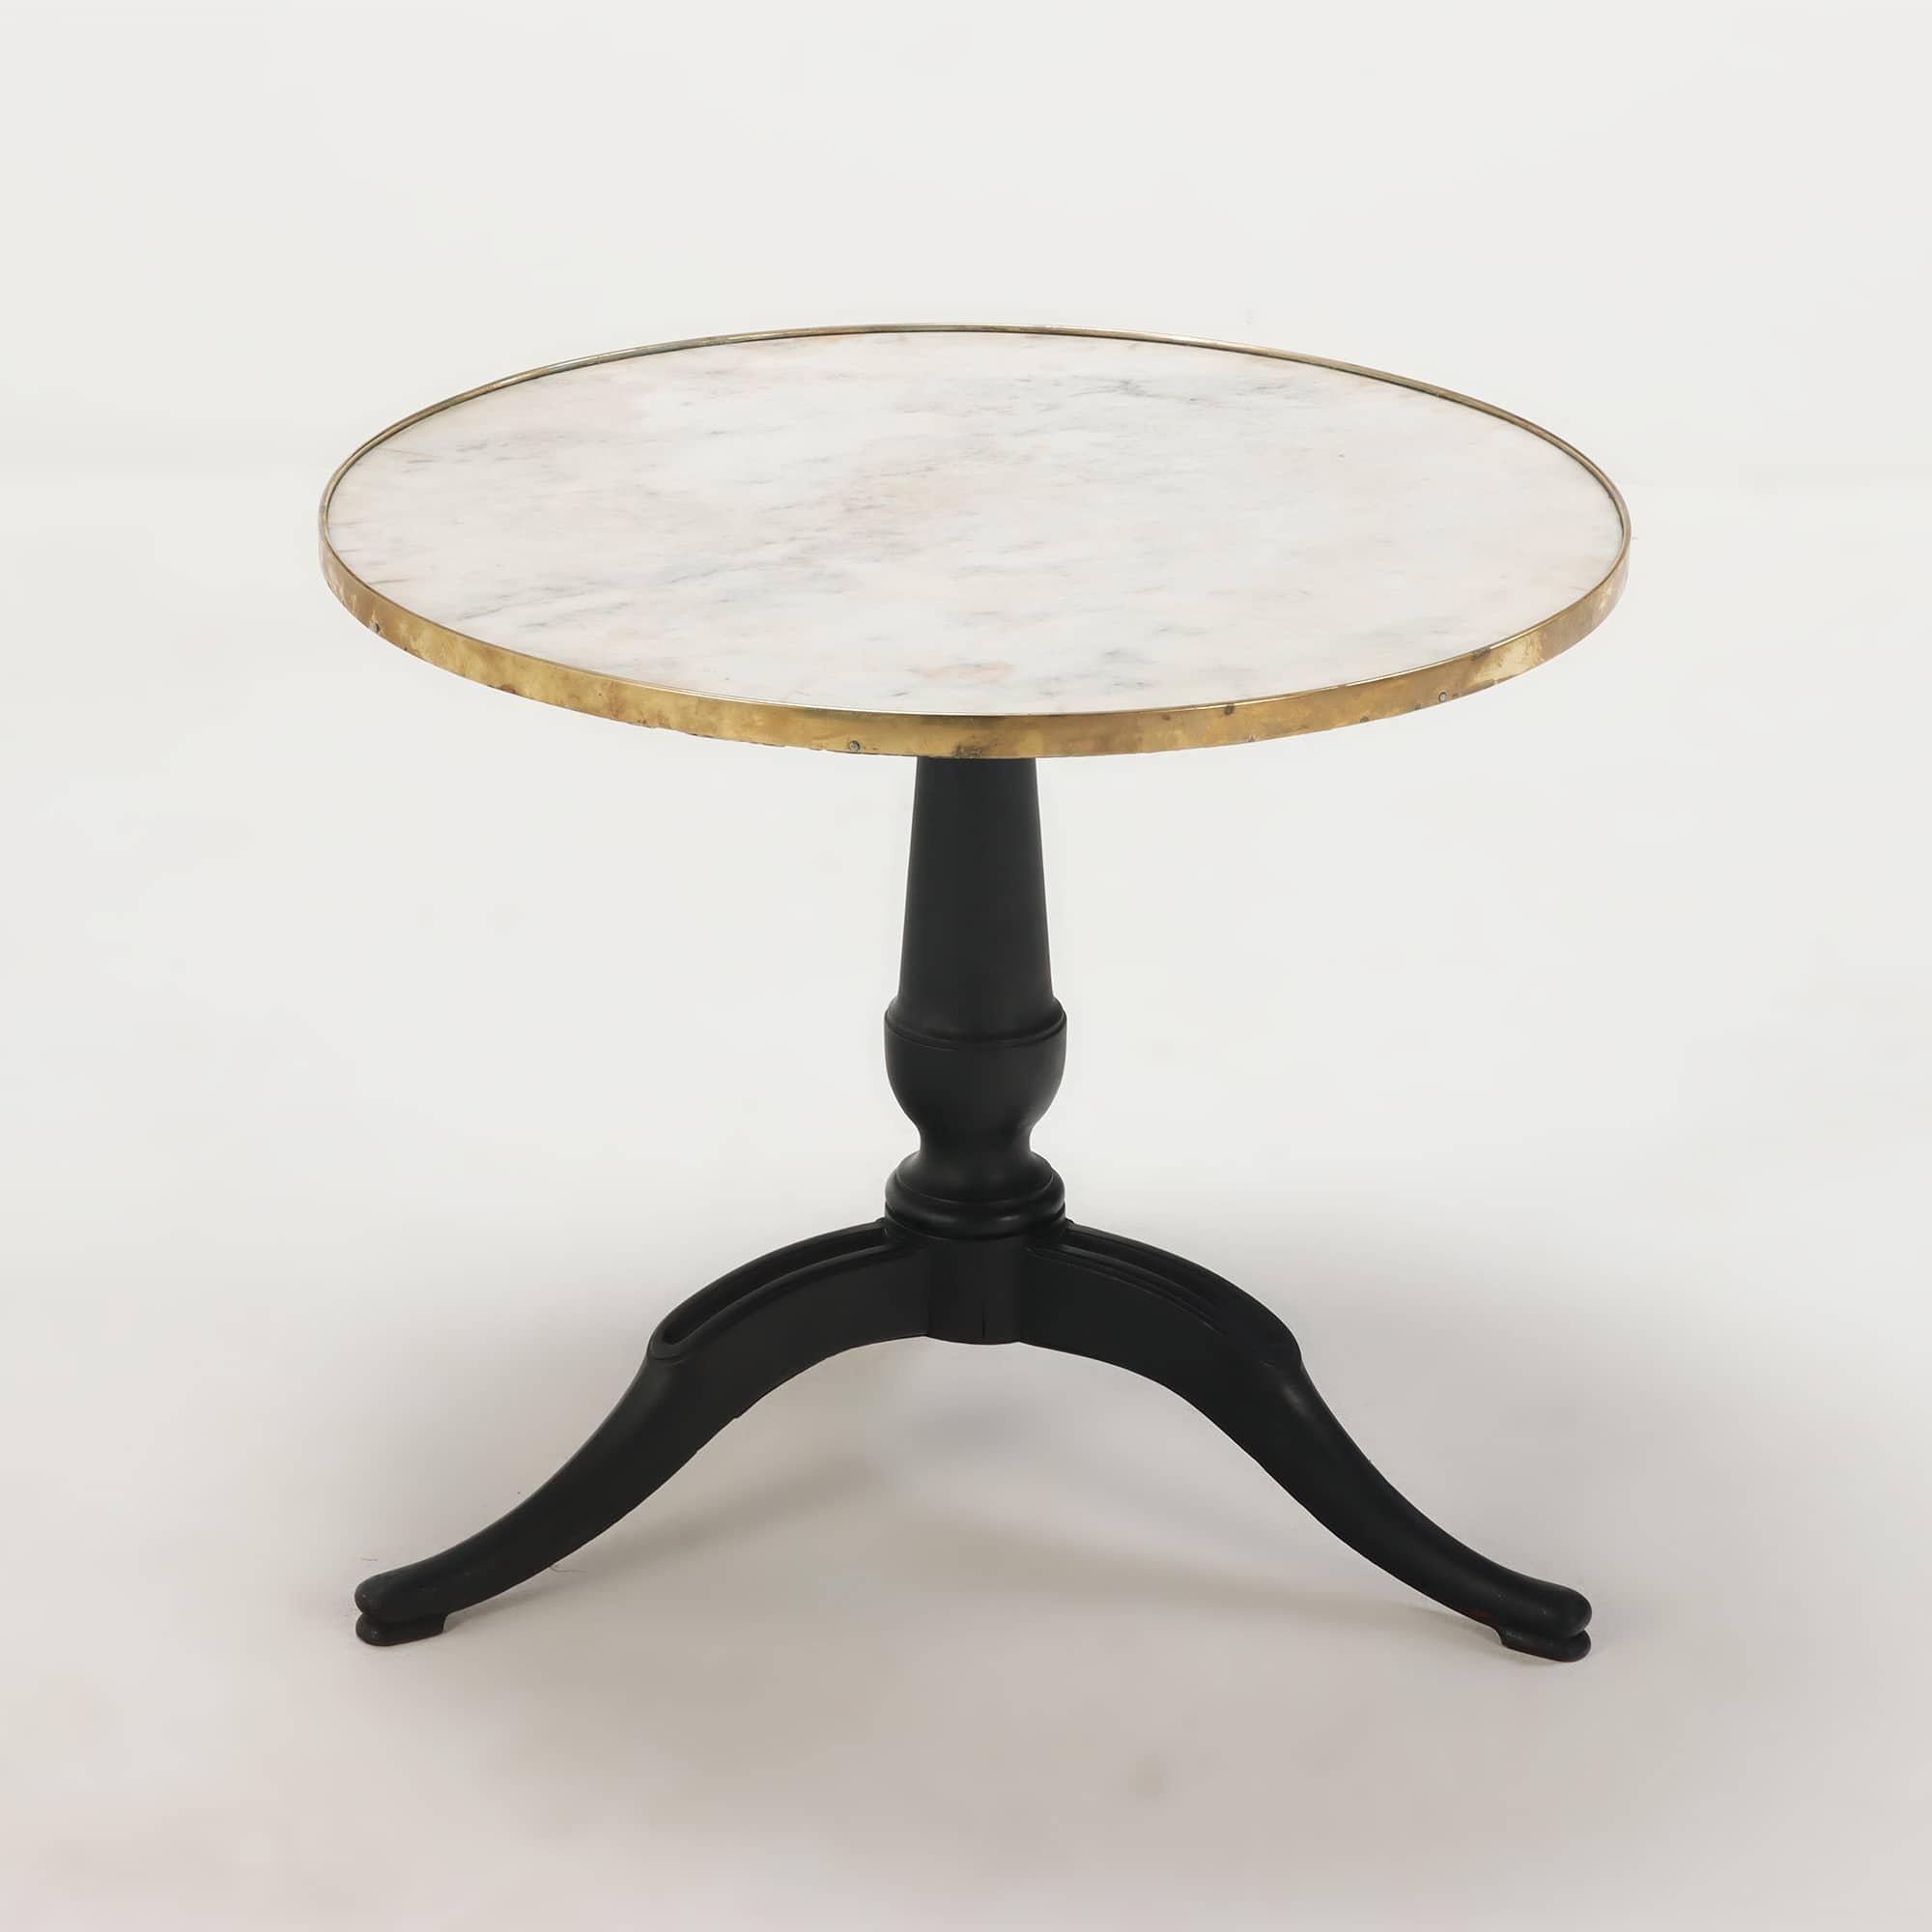 A French marble top occasional table having a turned ebonized base supporting a white marble top with a brass trim circa 1880.